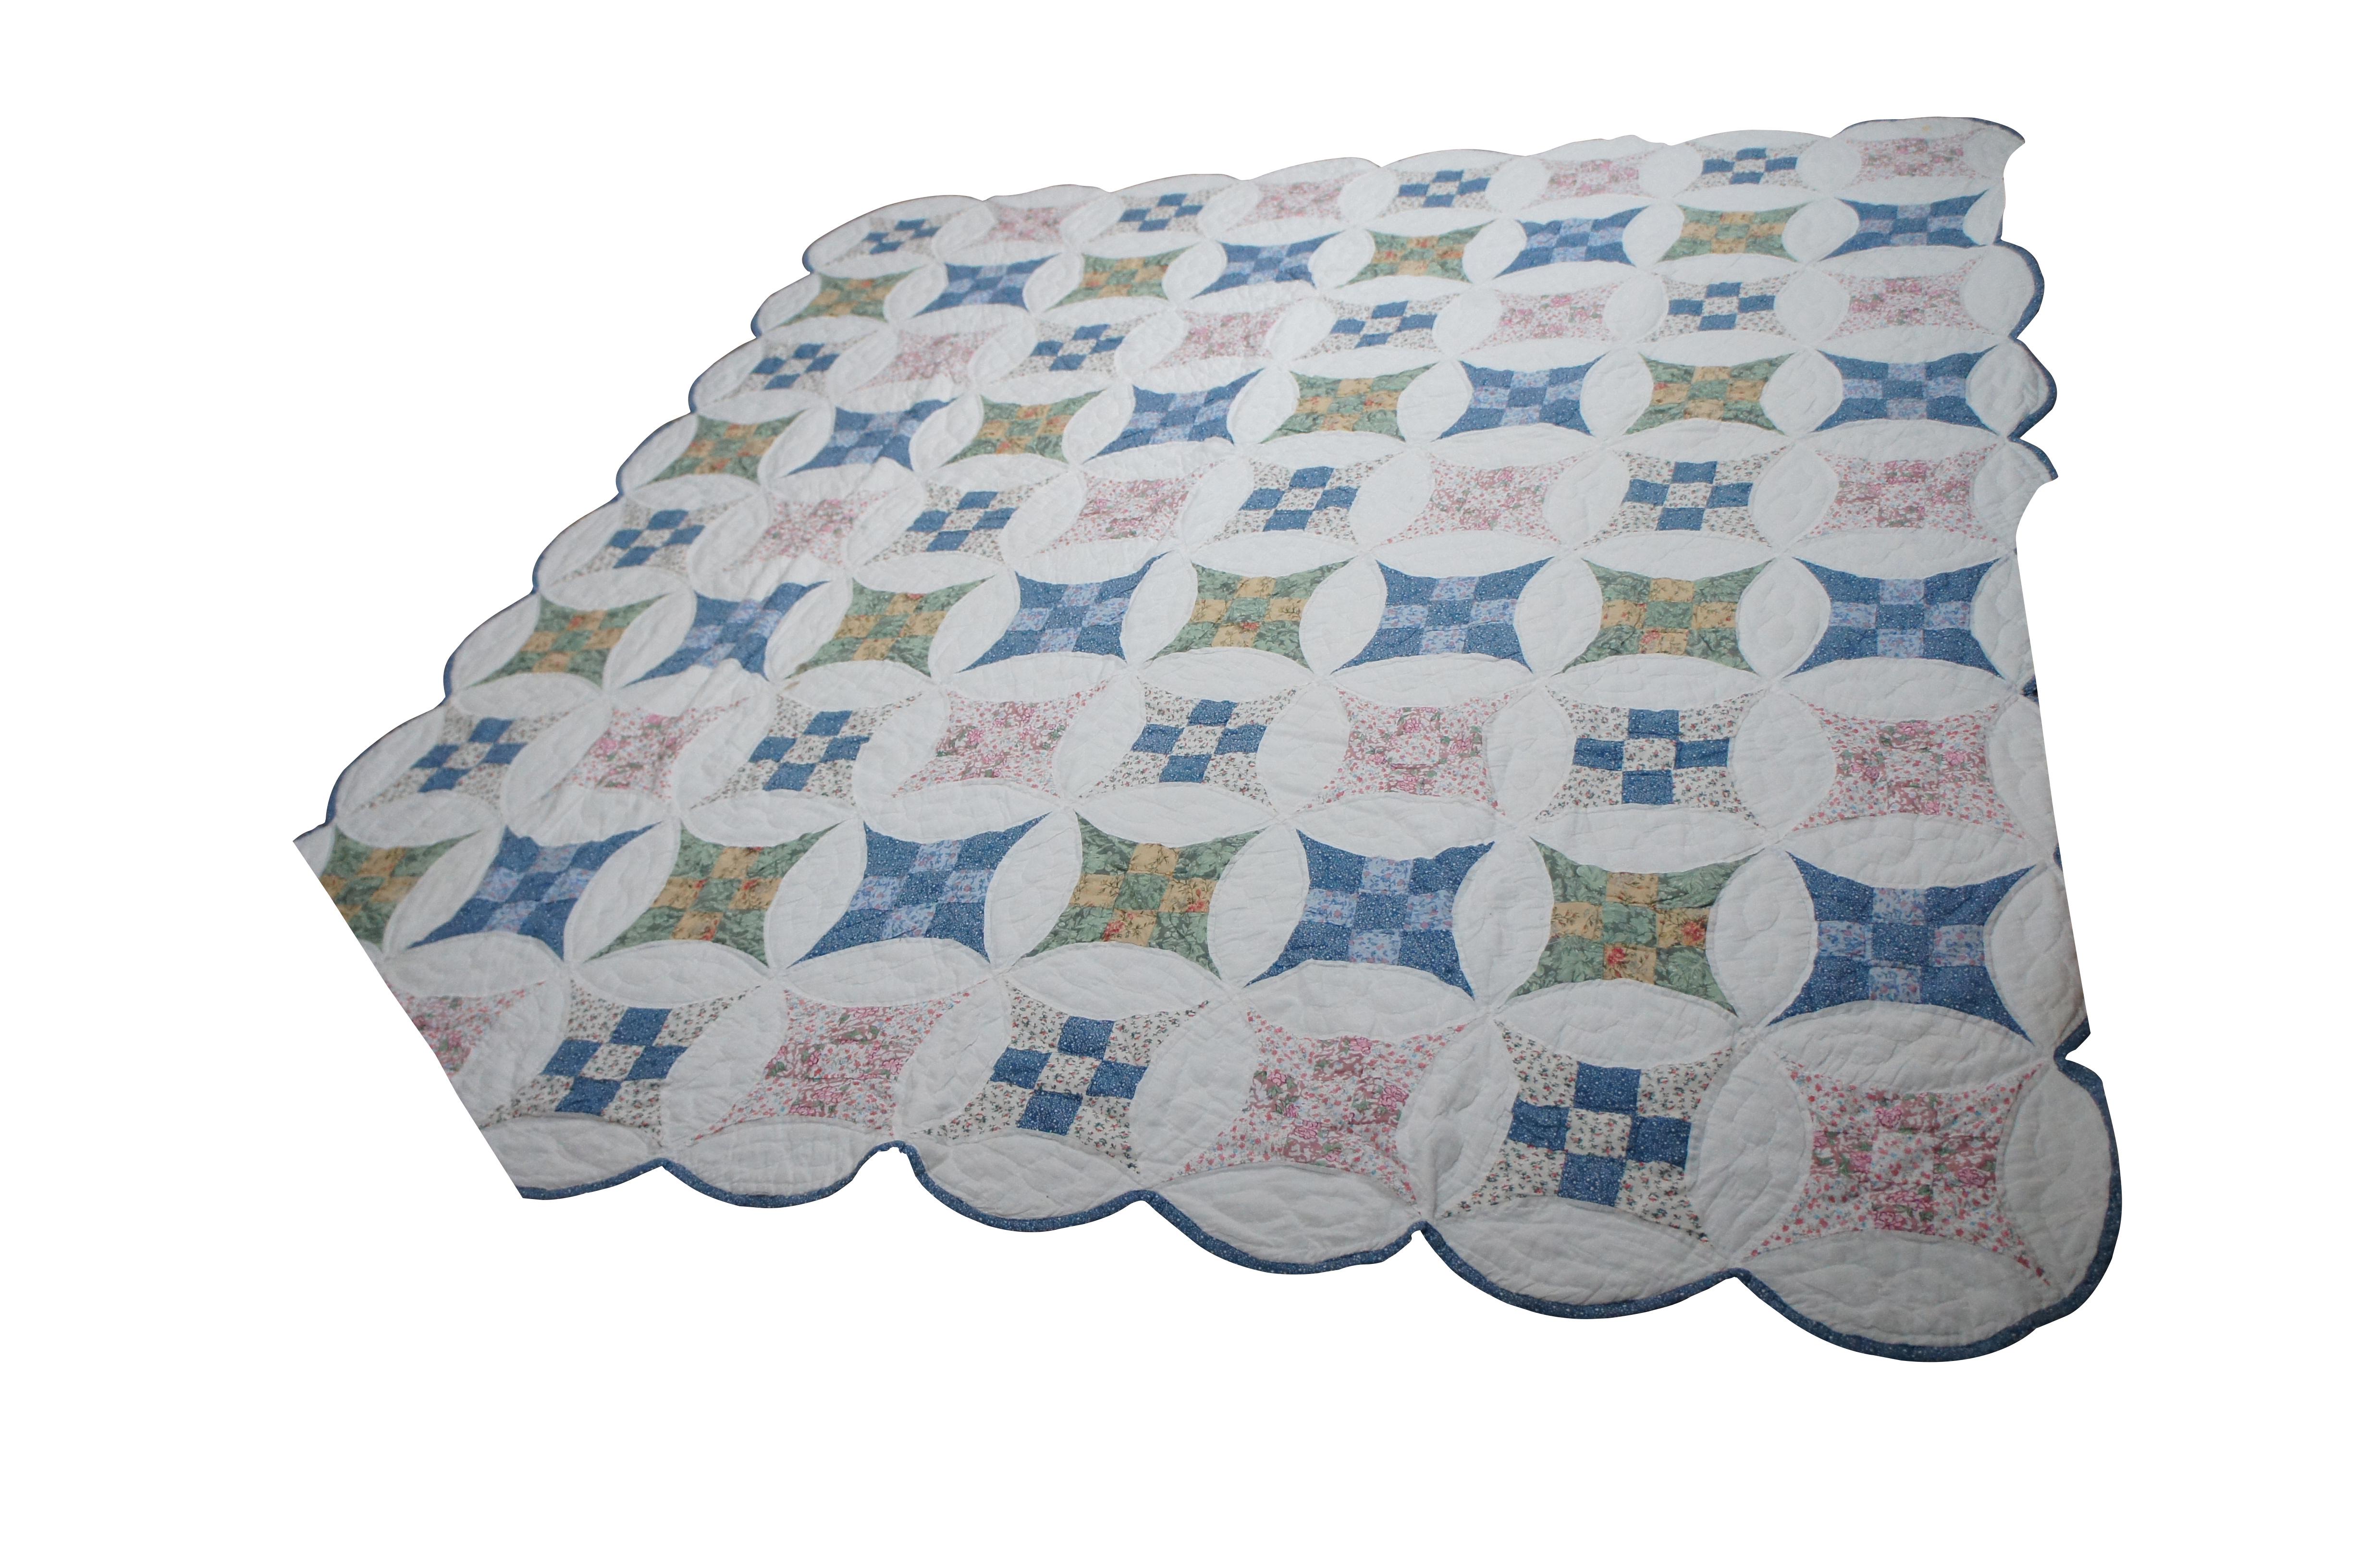 Vintage hand stitched quilt, blanket or bedspread featuring the Glorified or Improved Nine Patch geometric scalloped design with circles, squares and floral motifs.  Full to queen size.

The first known Nine Patch Quilts were made at the beginning